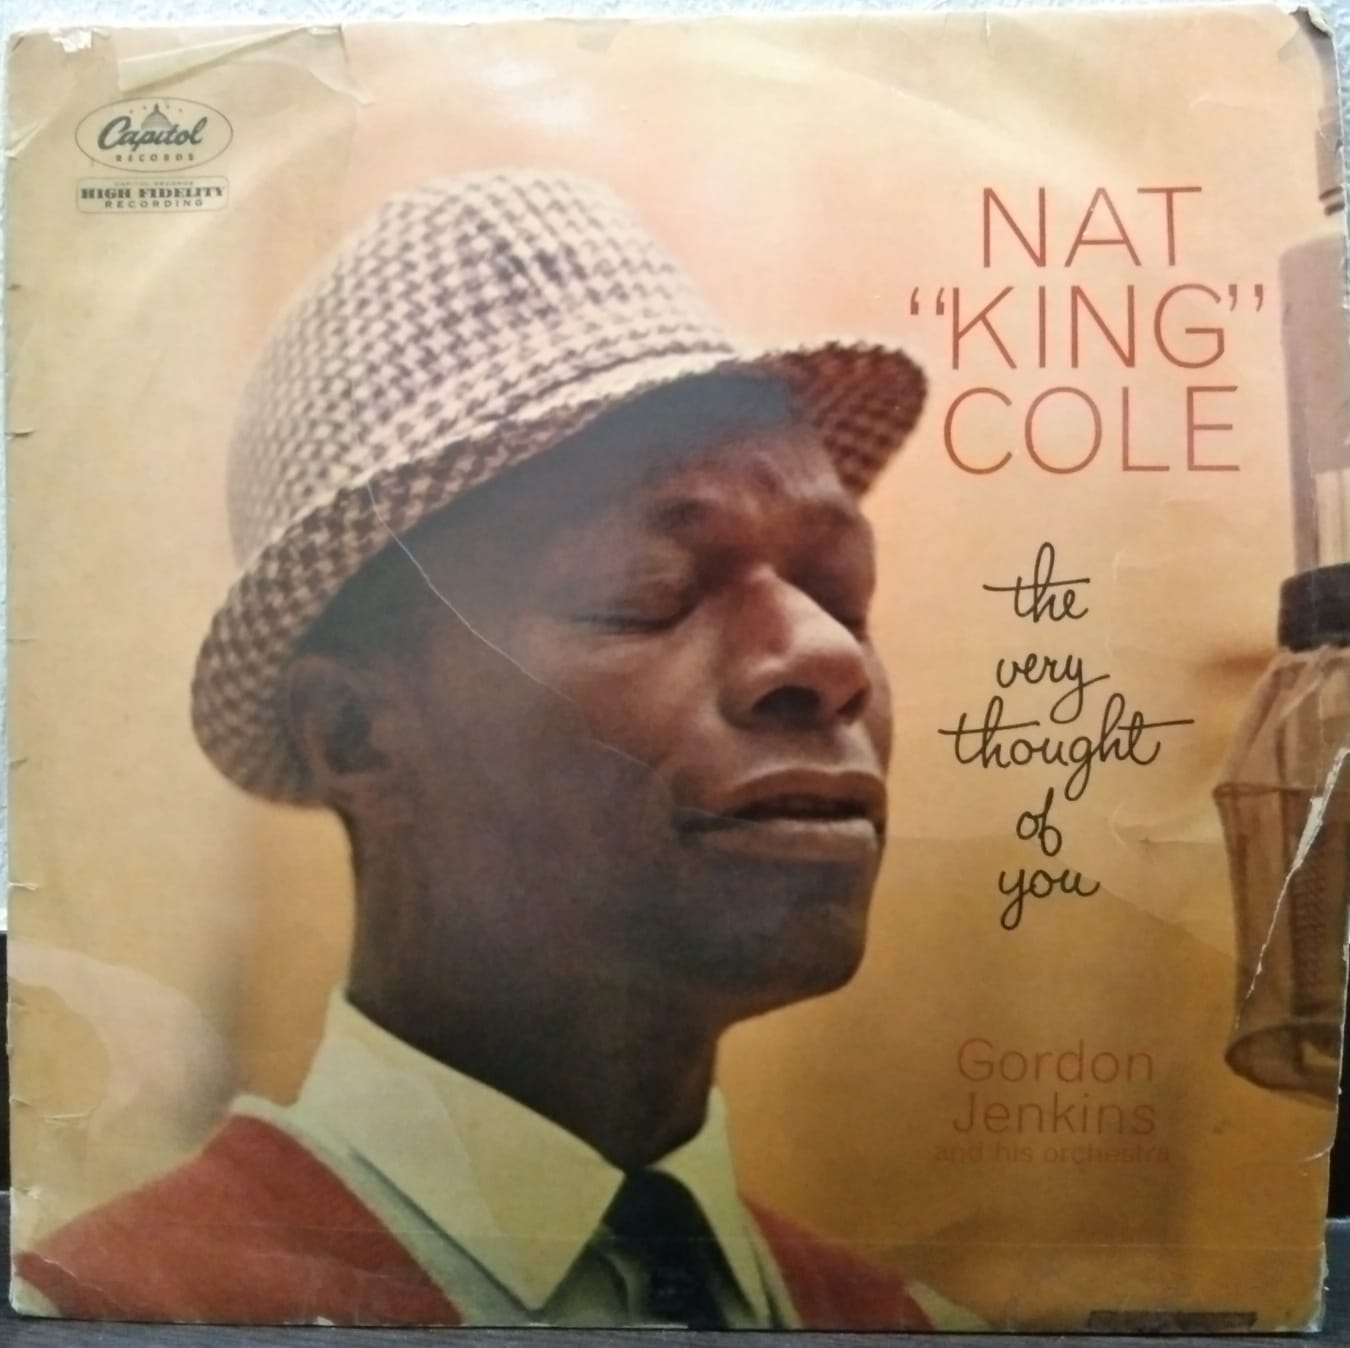 THE VERY THOUGHT OF YOU BY NAT KING COLE